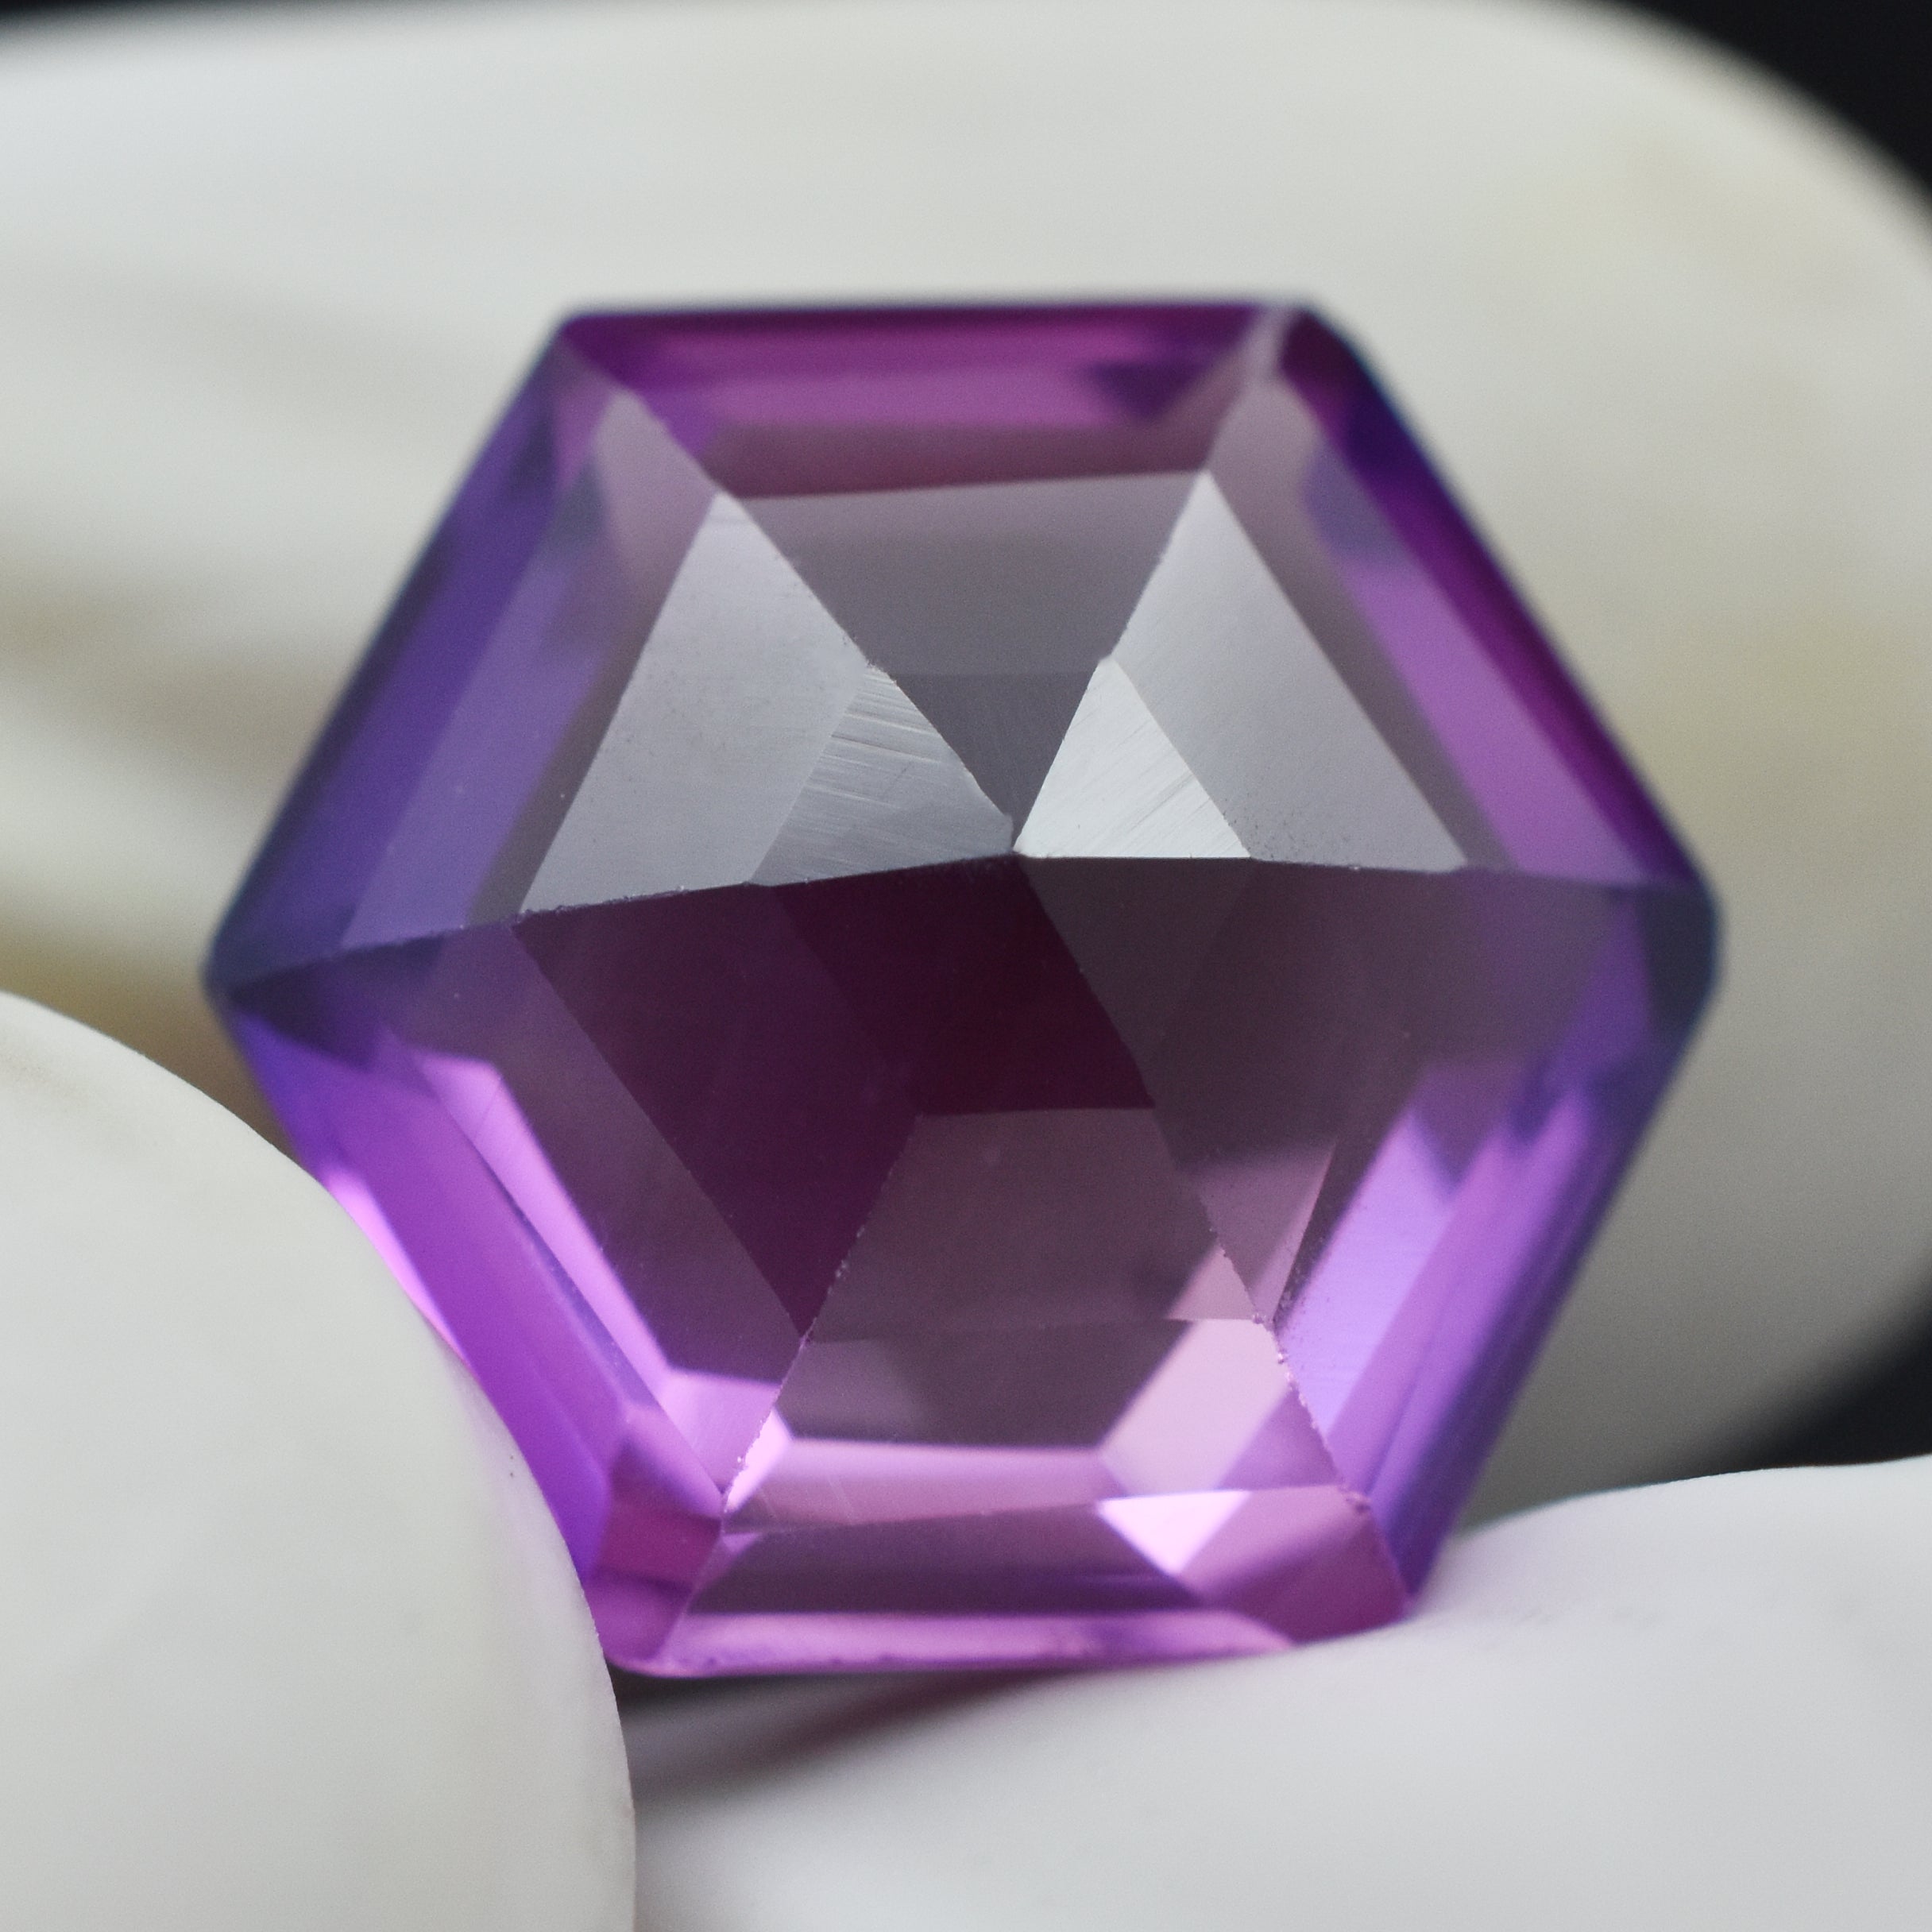 Natural Flawless Purple 9.56 Carat Sapphire Ceylon Octagon Shape Ring Size  Loose Gemstone Certified, Best Quality Sapphire For Gift , Ring & Jewelry Making Gemstone Free Gift Free Delivery